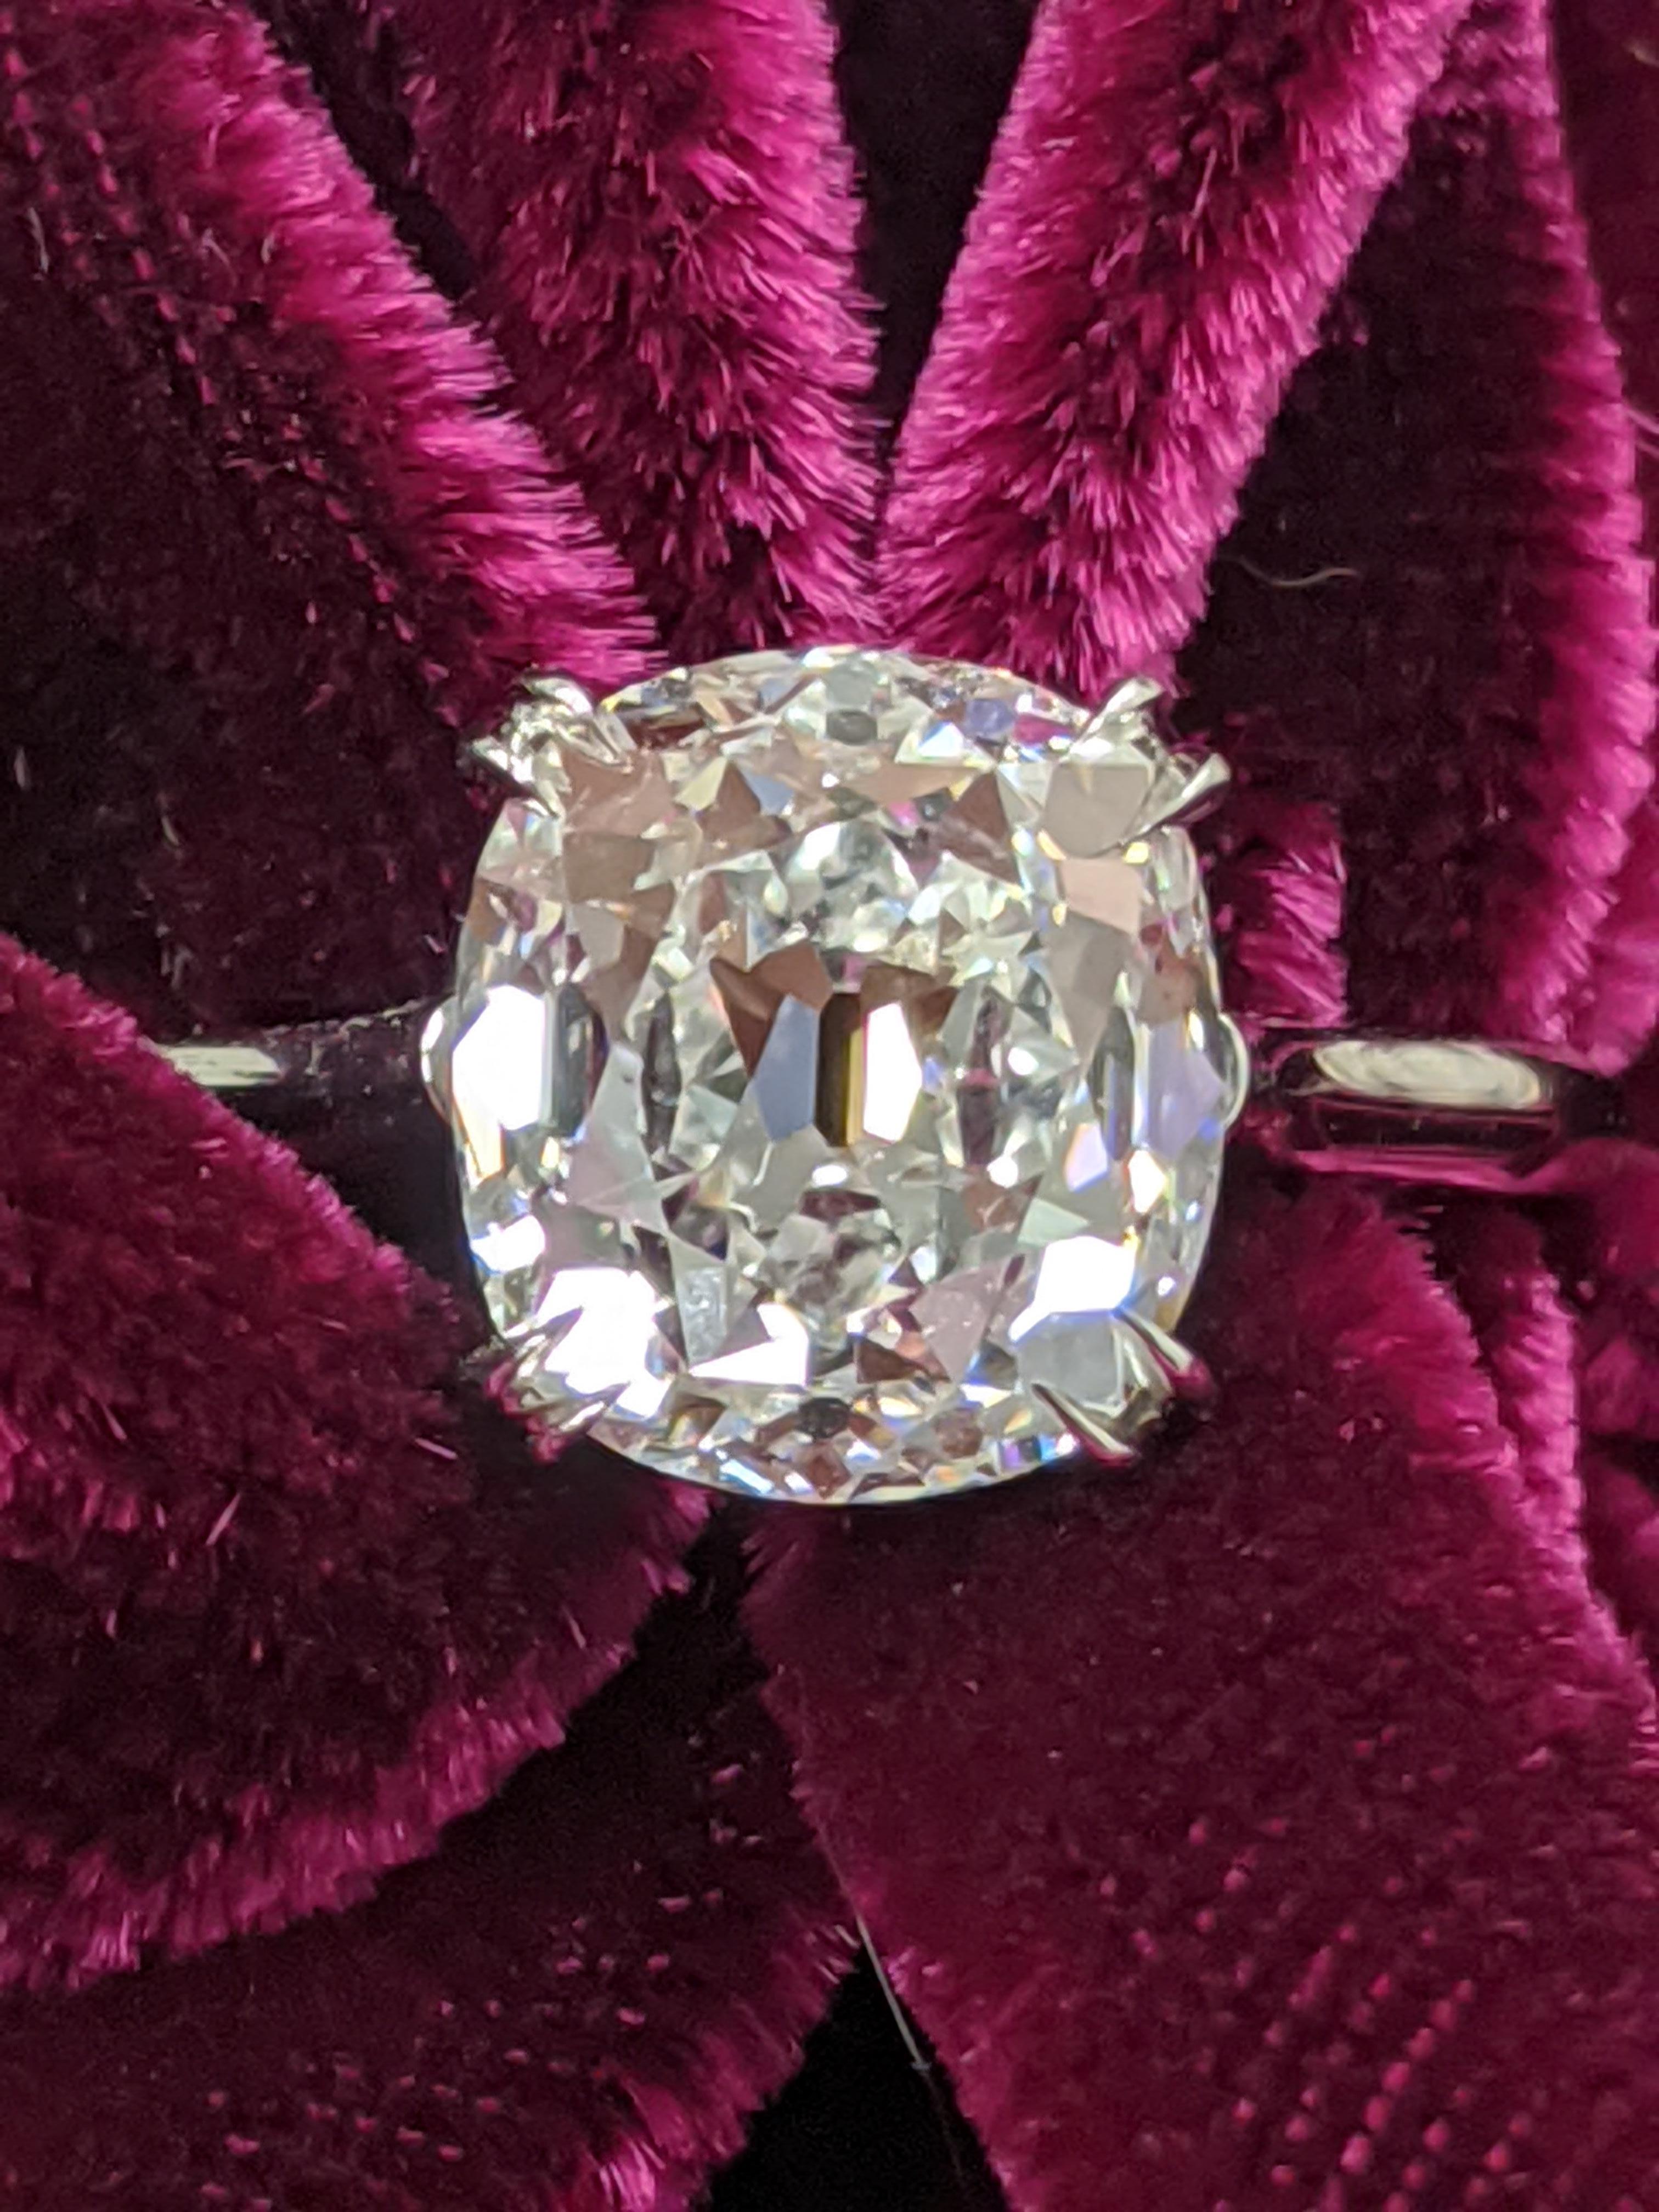 This 3.06 carat D VS1 Antique style cut Cushion Diamond is mounted in a classic platinum solitaire and comes with a GIA grading report.  Our diamond cutting office in New York City is one of the last remaining in the United States and specializes in